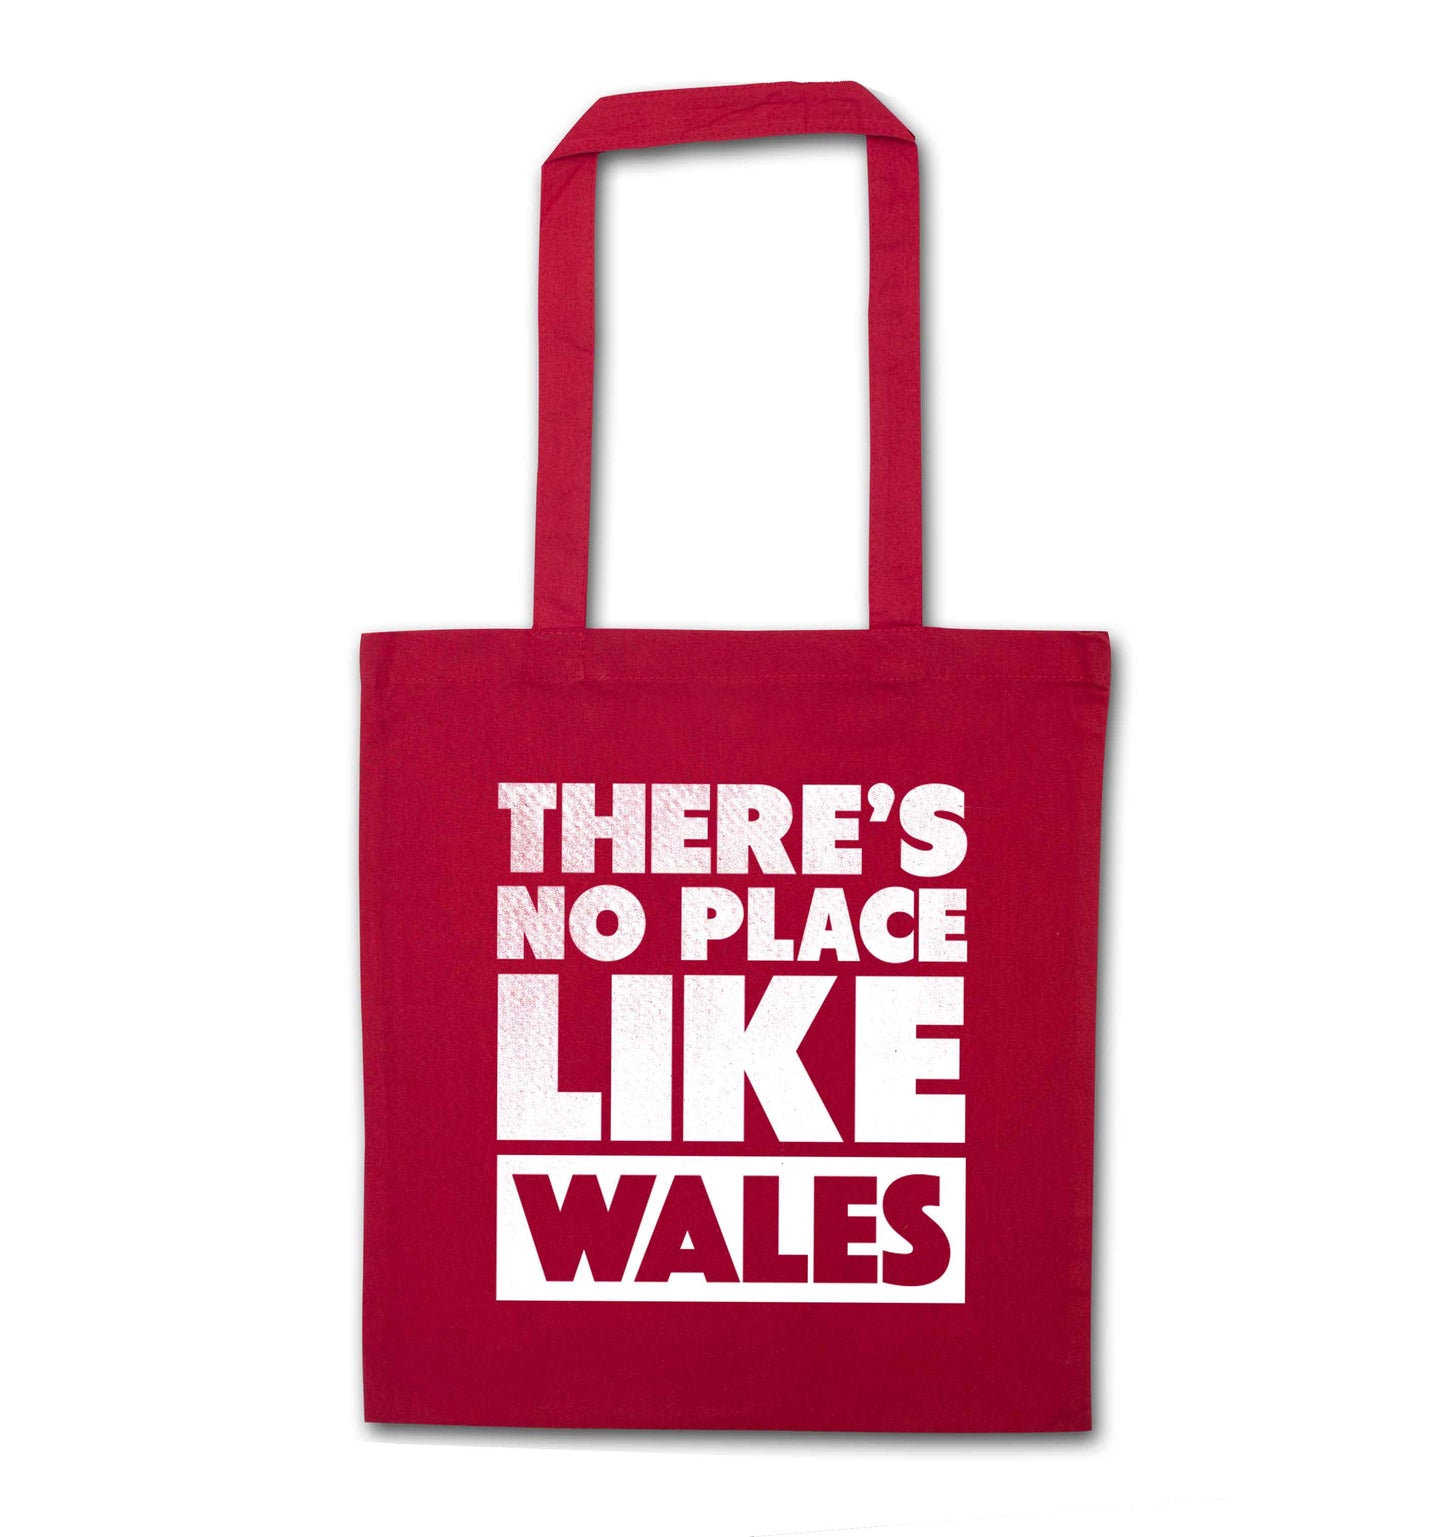 There's no place like Wales red tote bag